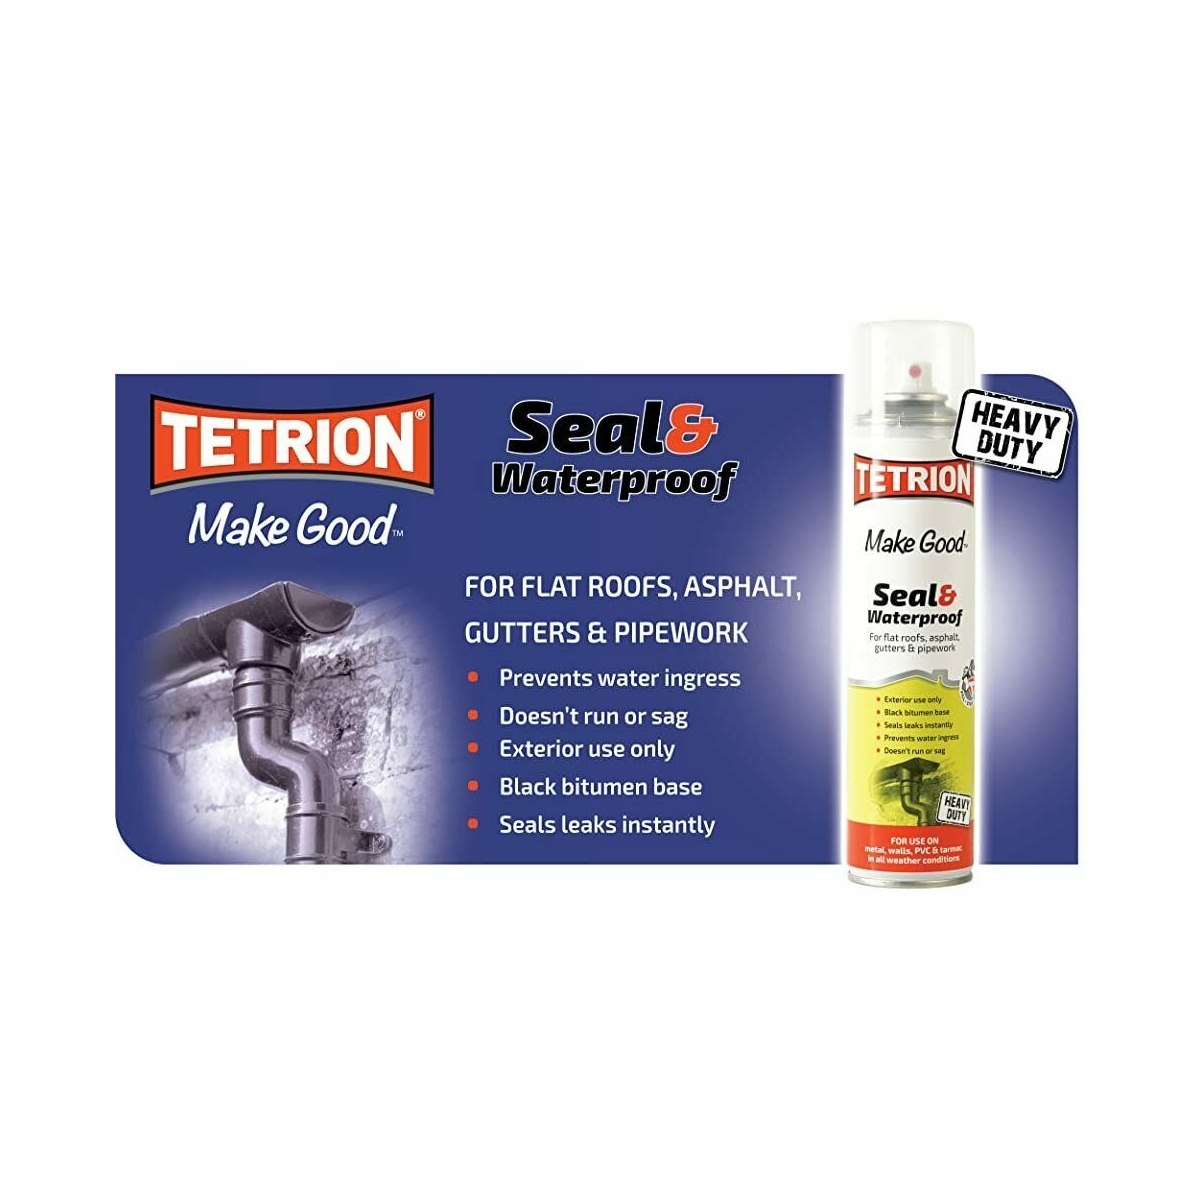 Where to Buy Tetrion Seal and Waterproof Spray